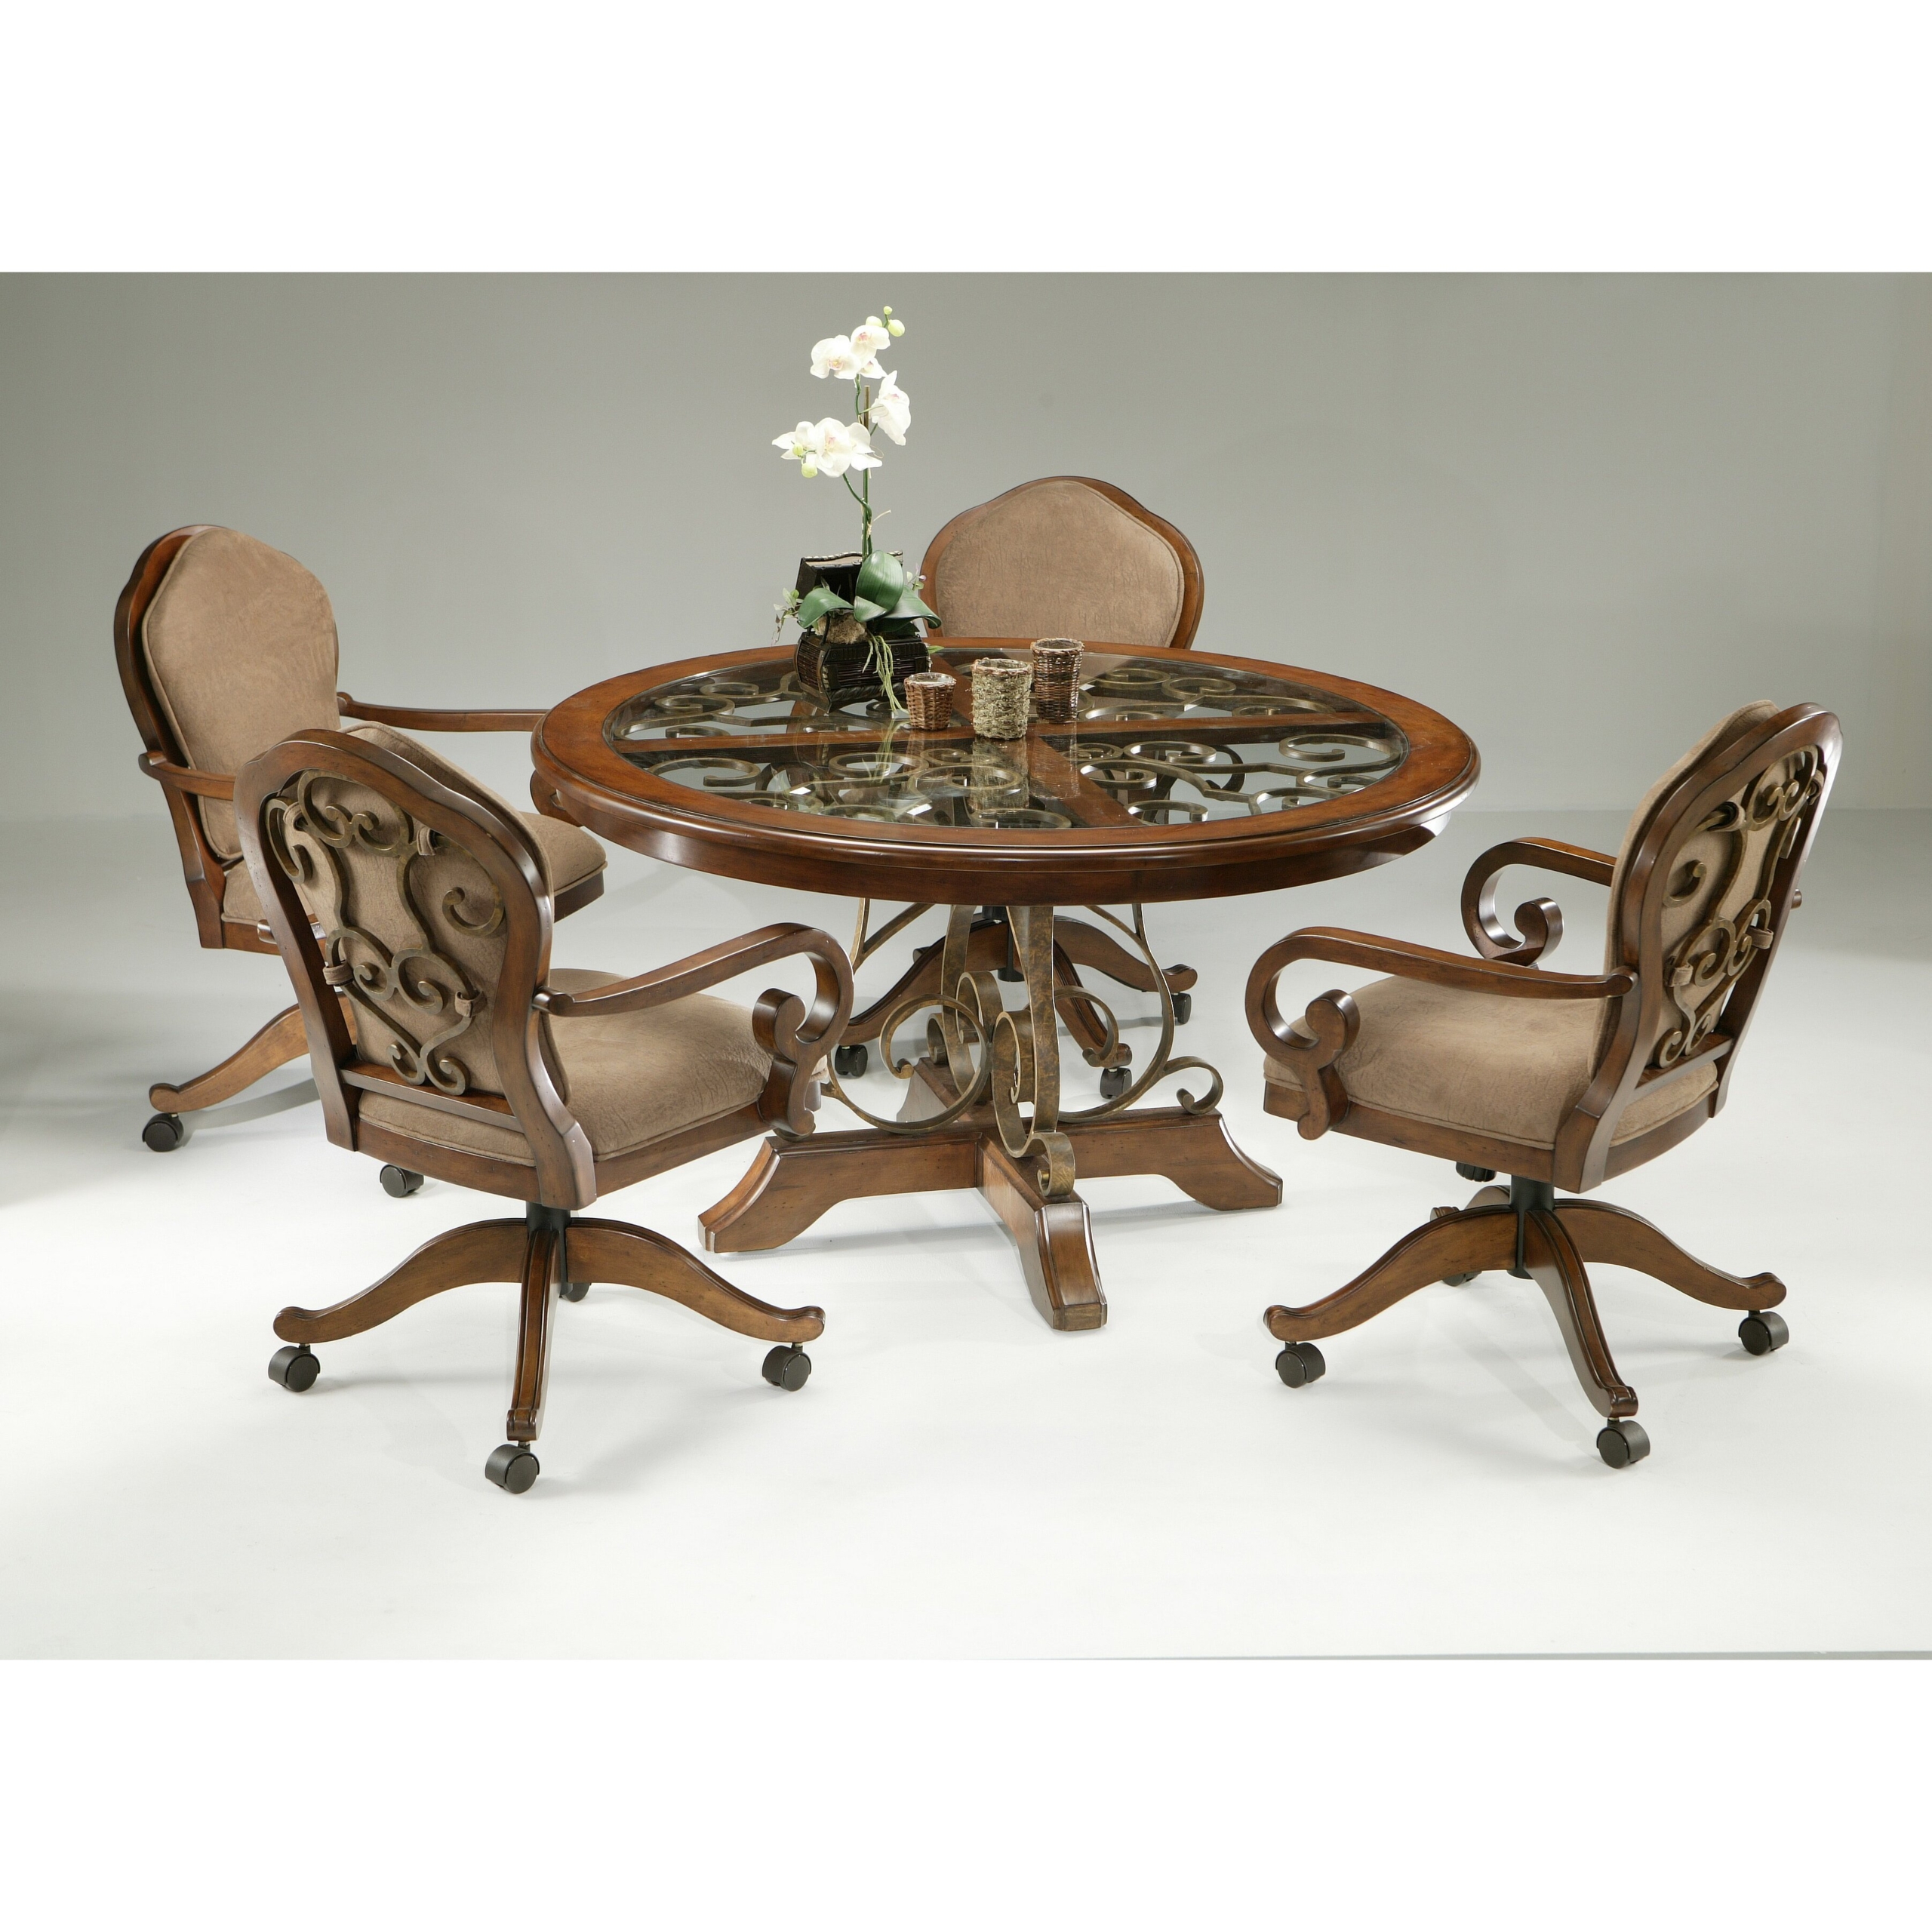 Dinette Sets With Caster Chairs, Kitchen Round Table And Chairs Set